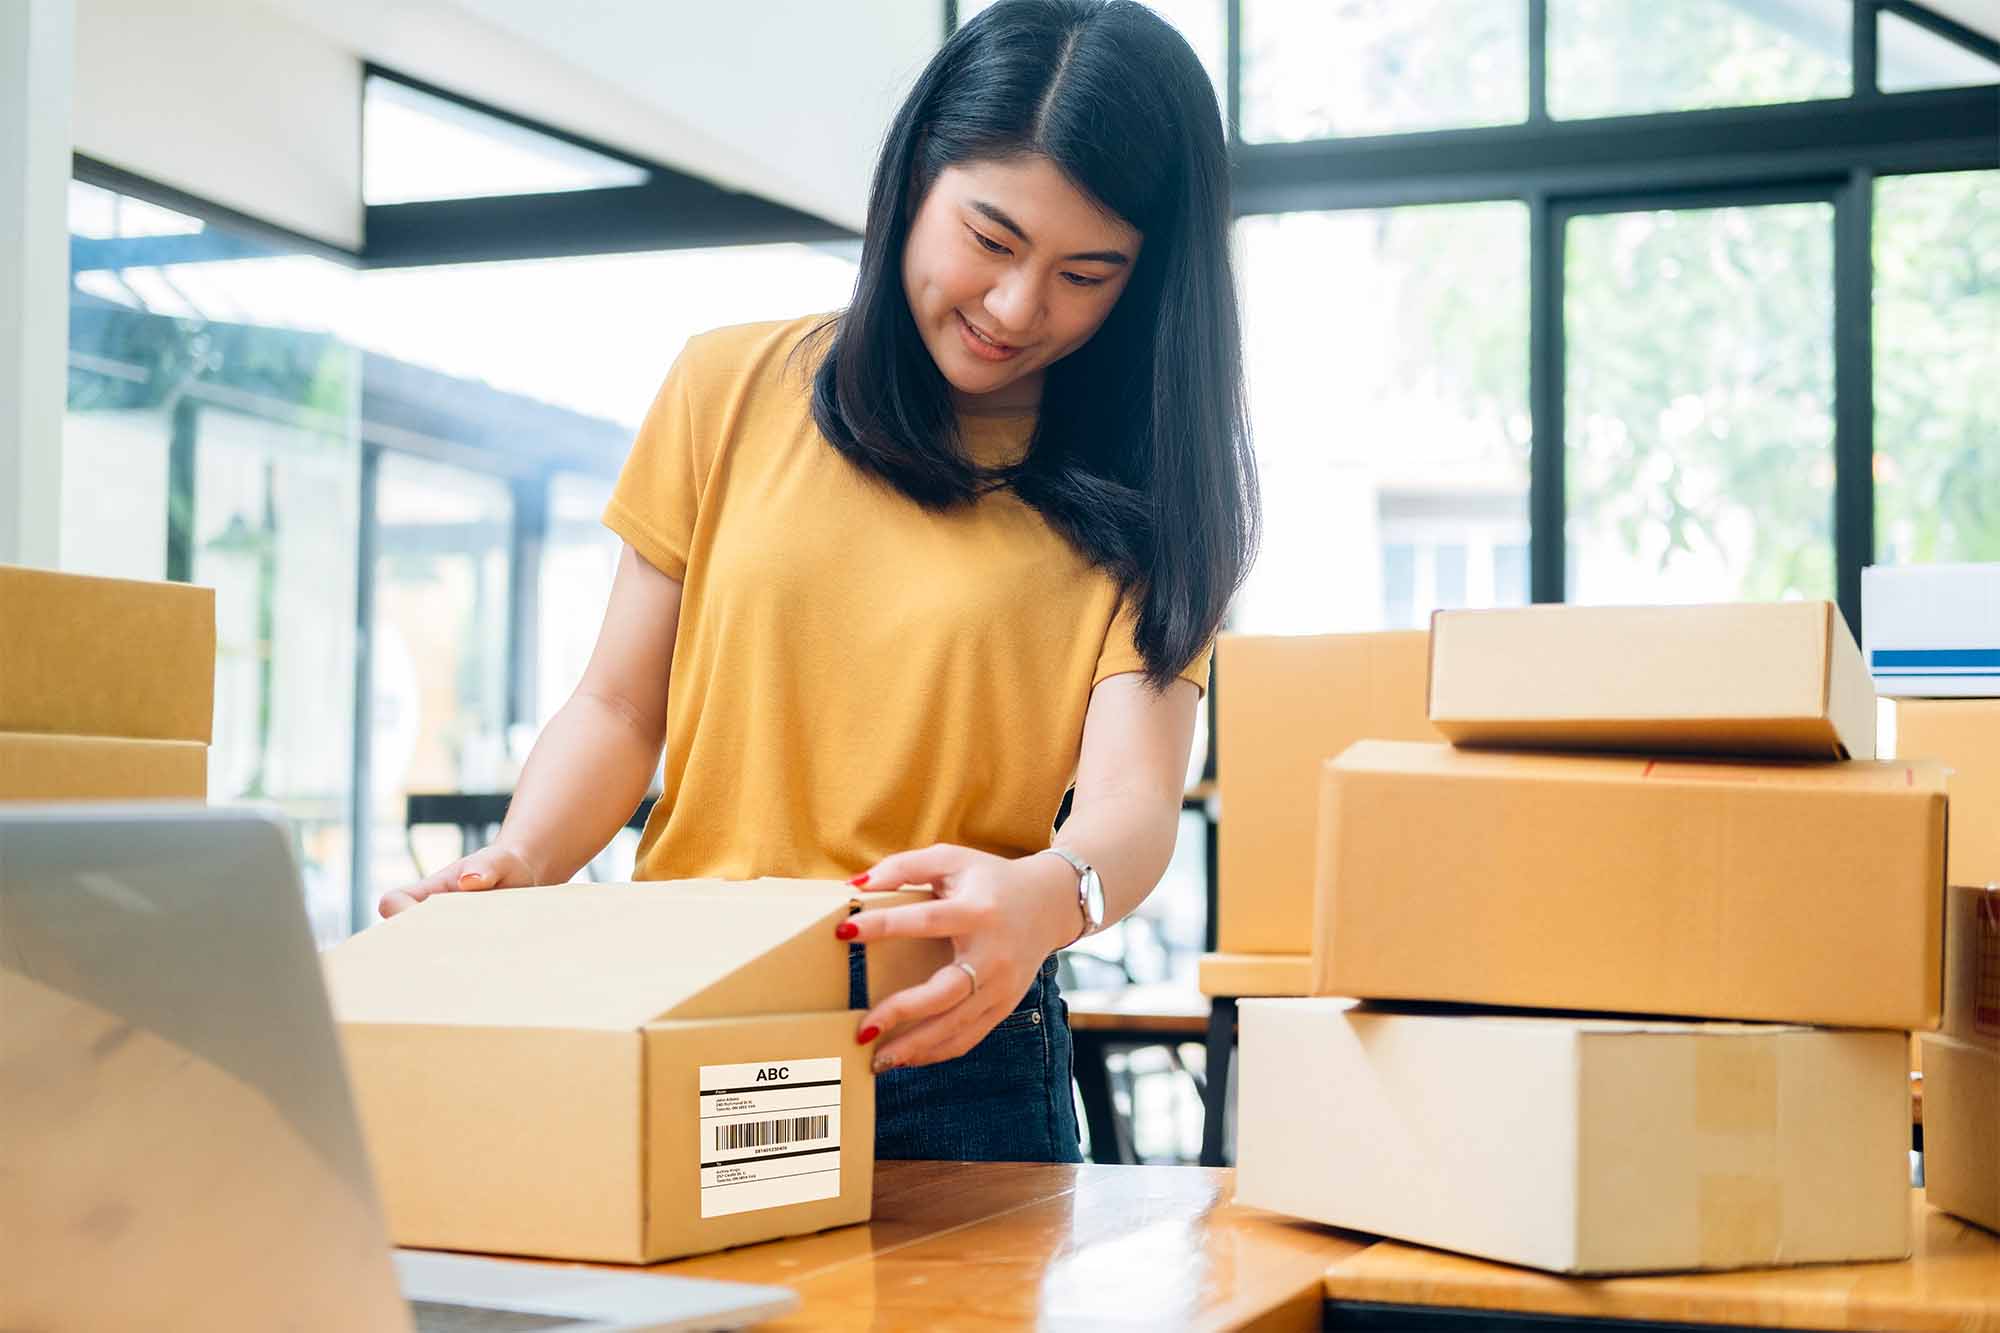 How to Pick the Best Shipping Label Printer for Your Small Business